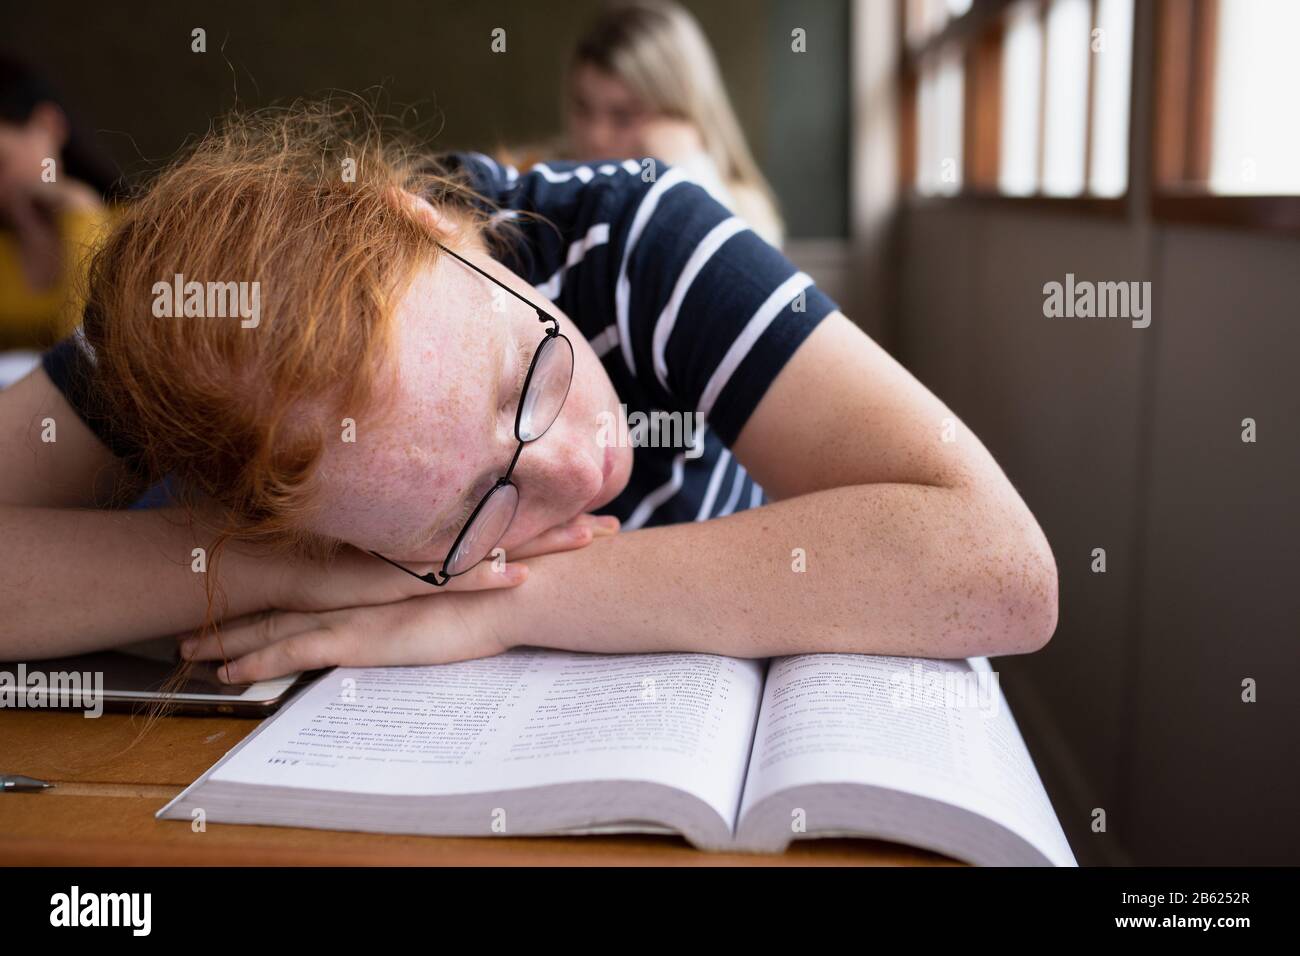 Front view of student sleeping in class Stock Photo